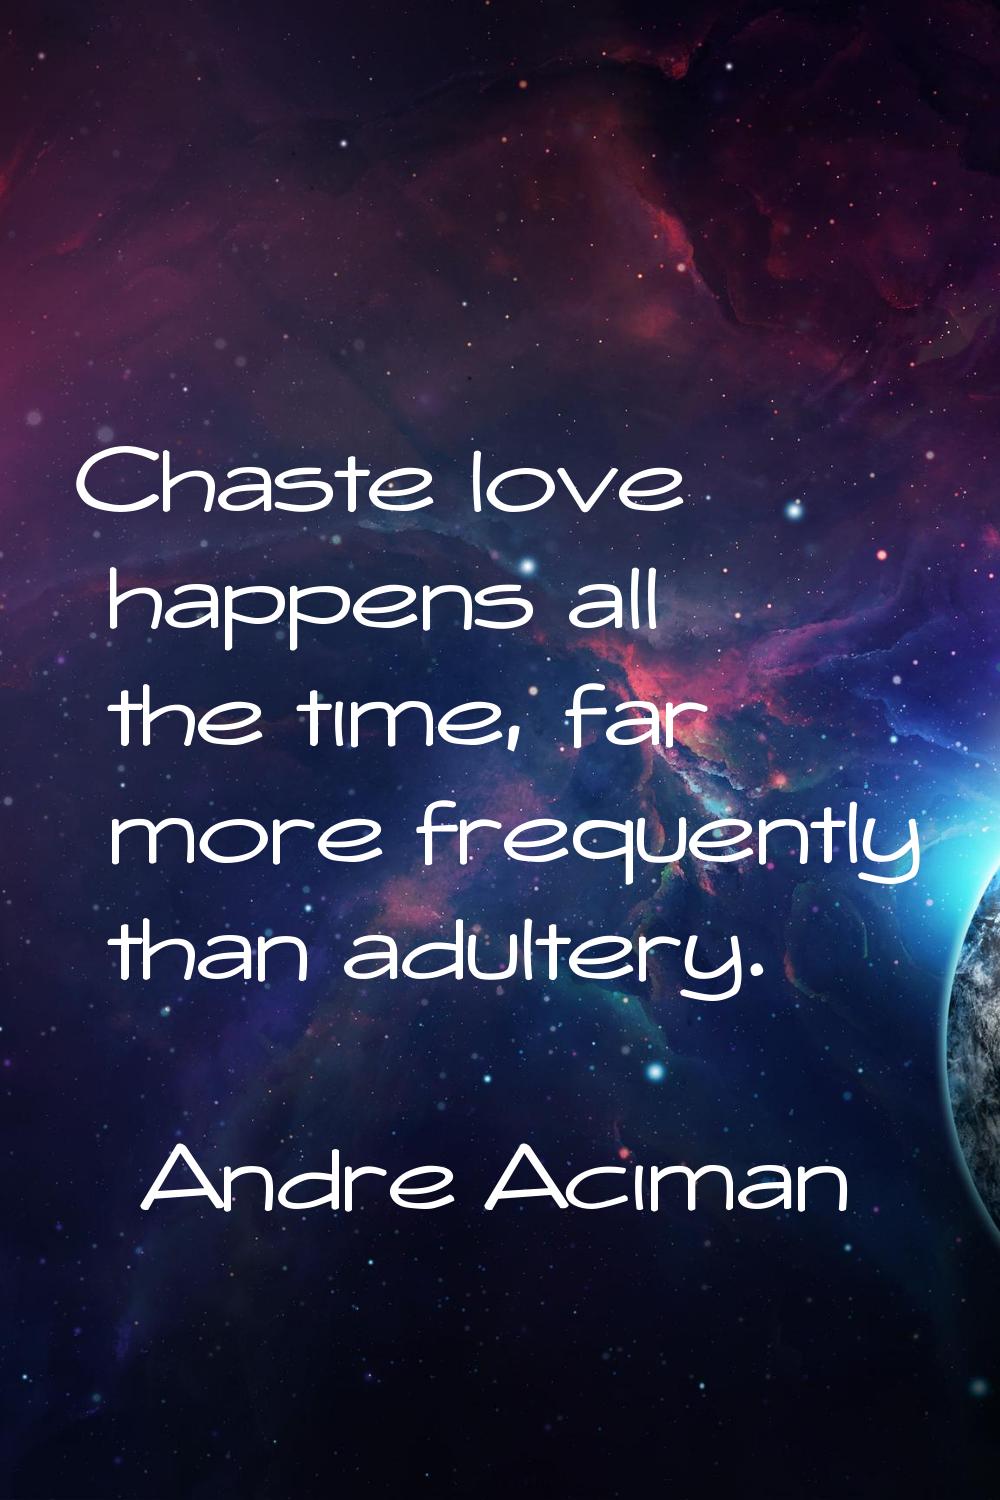 Chaste love happens all the time, far more frequently than adultery.